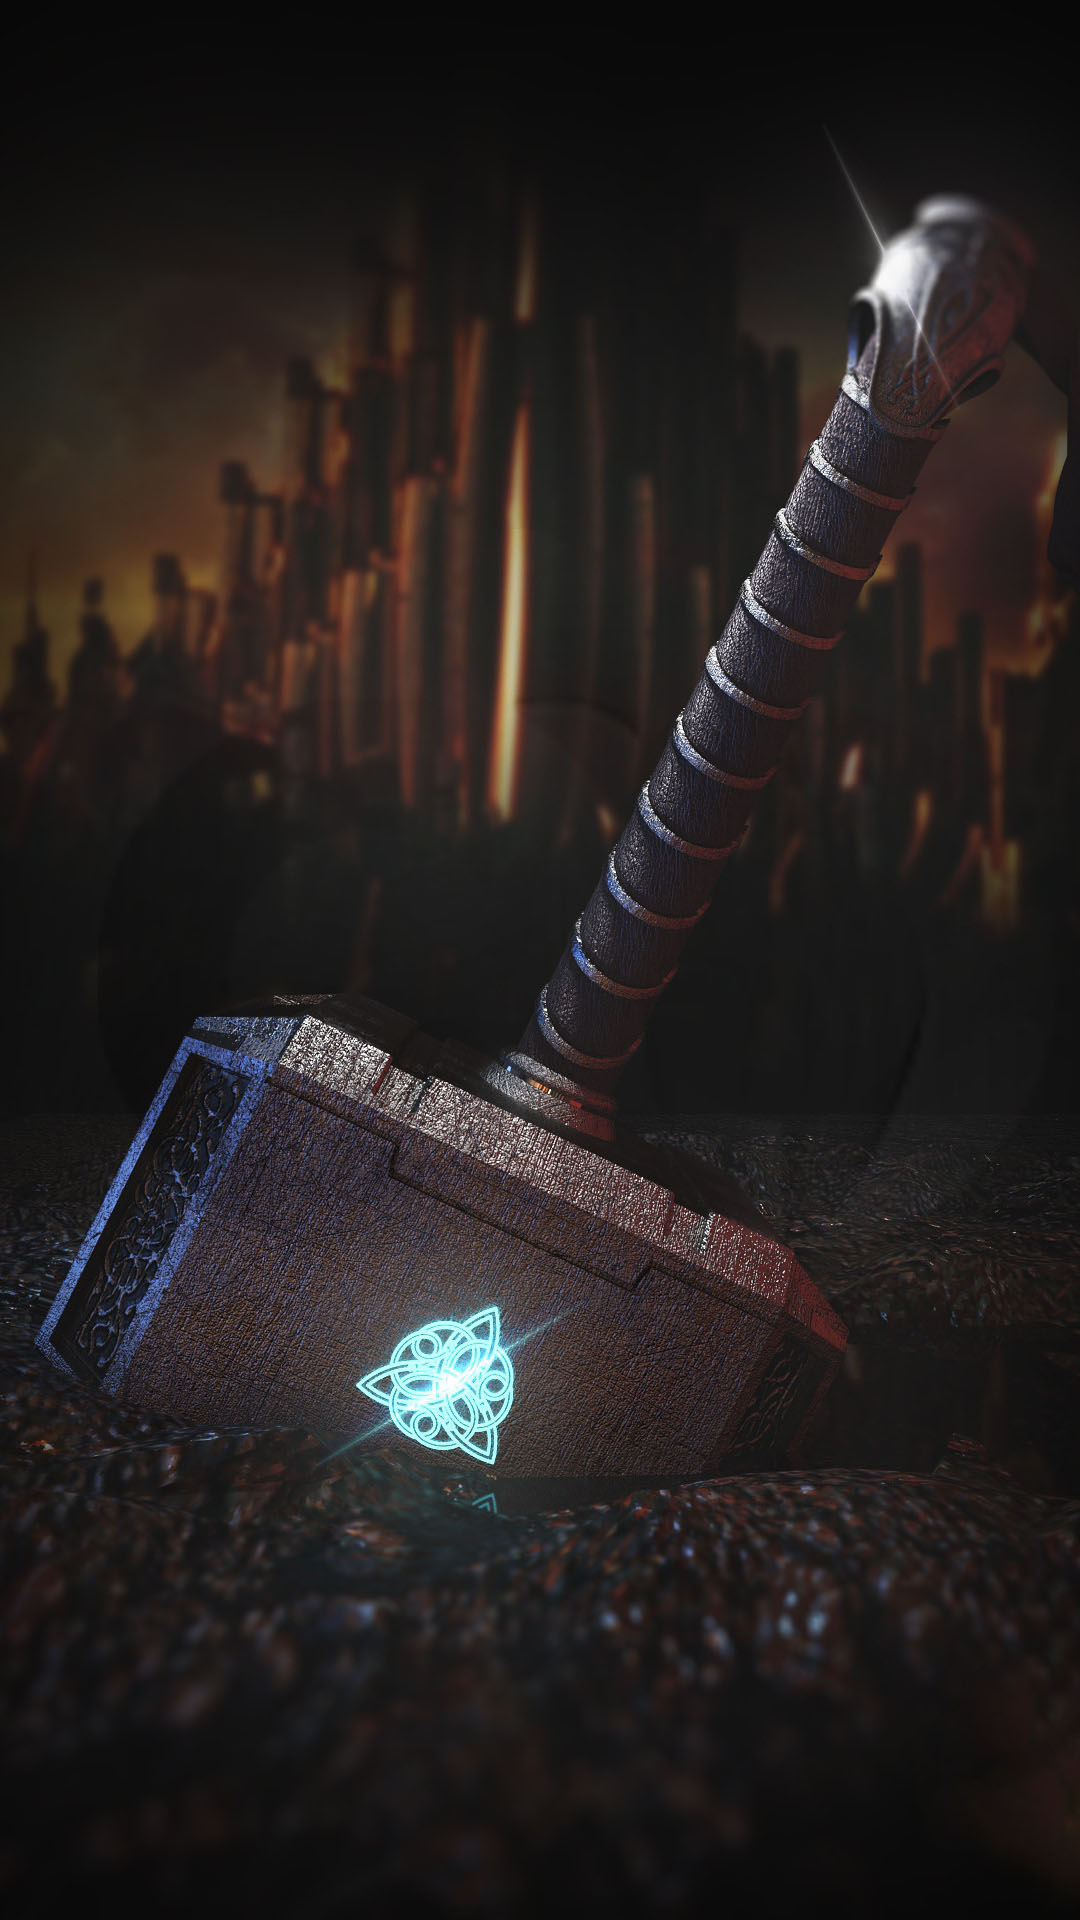 Thor Hammer iPhone Wallpaper - iPhone Wallpapers : iPhone ...